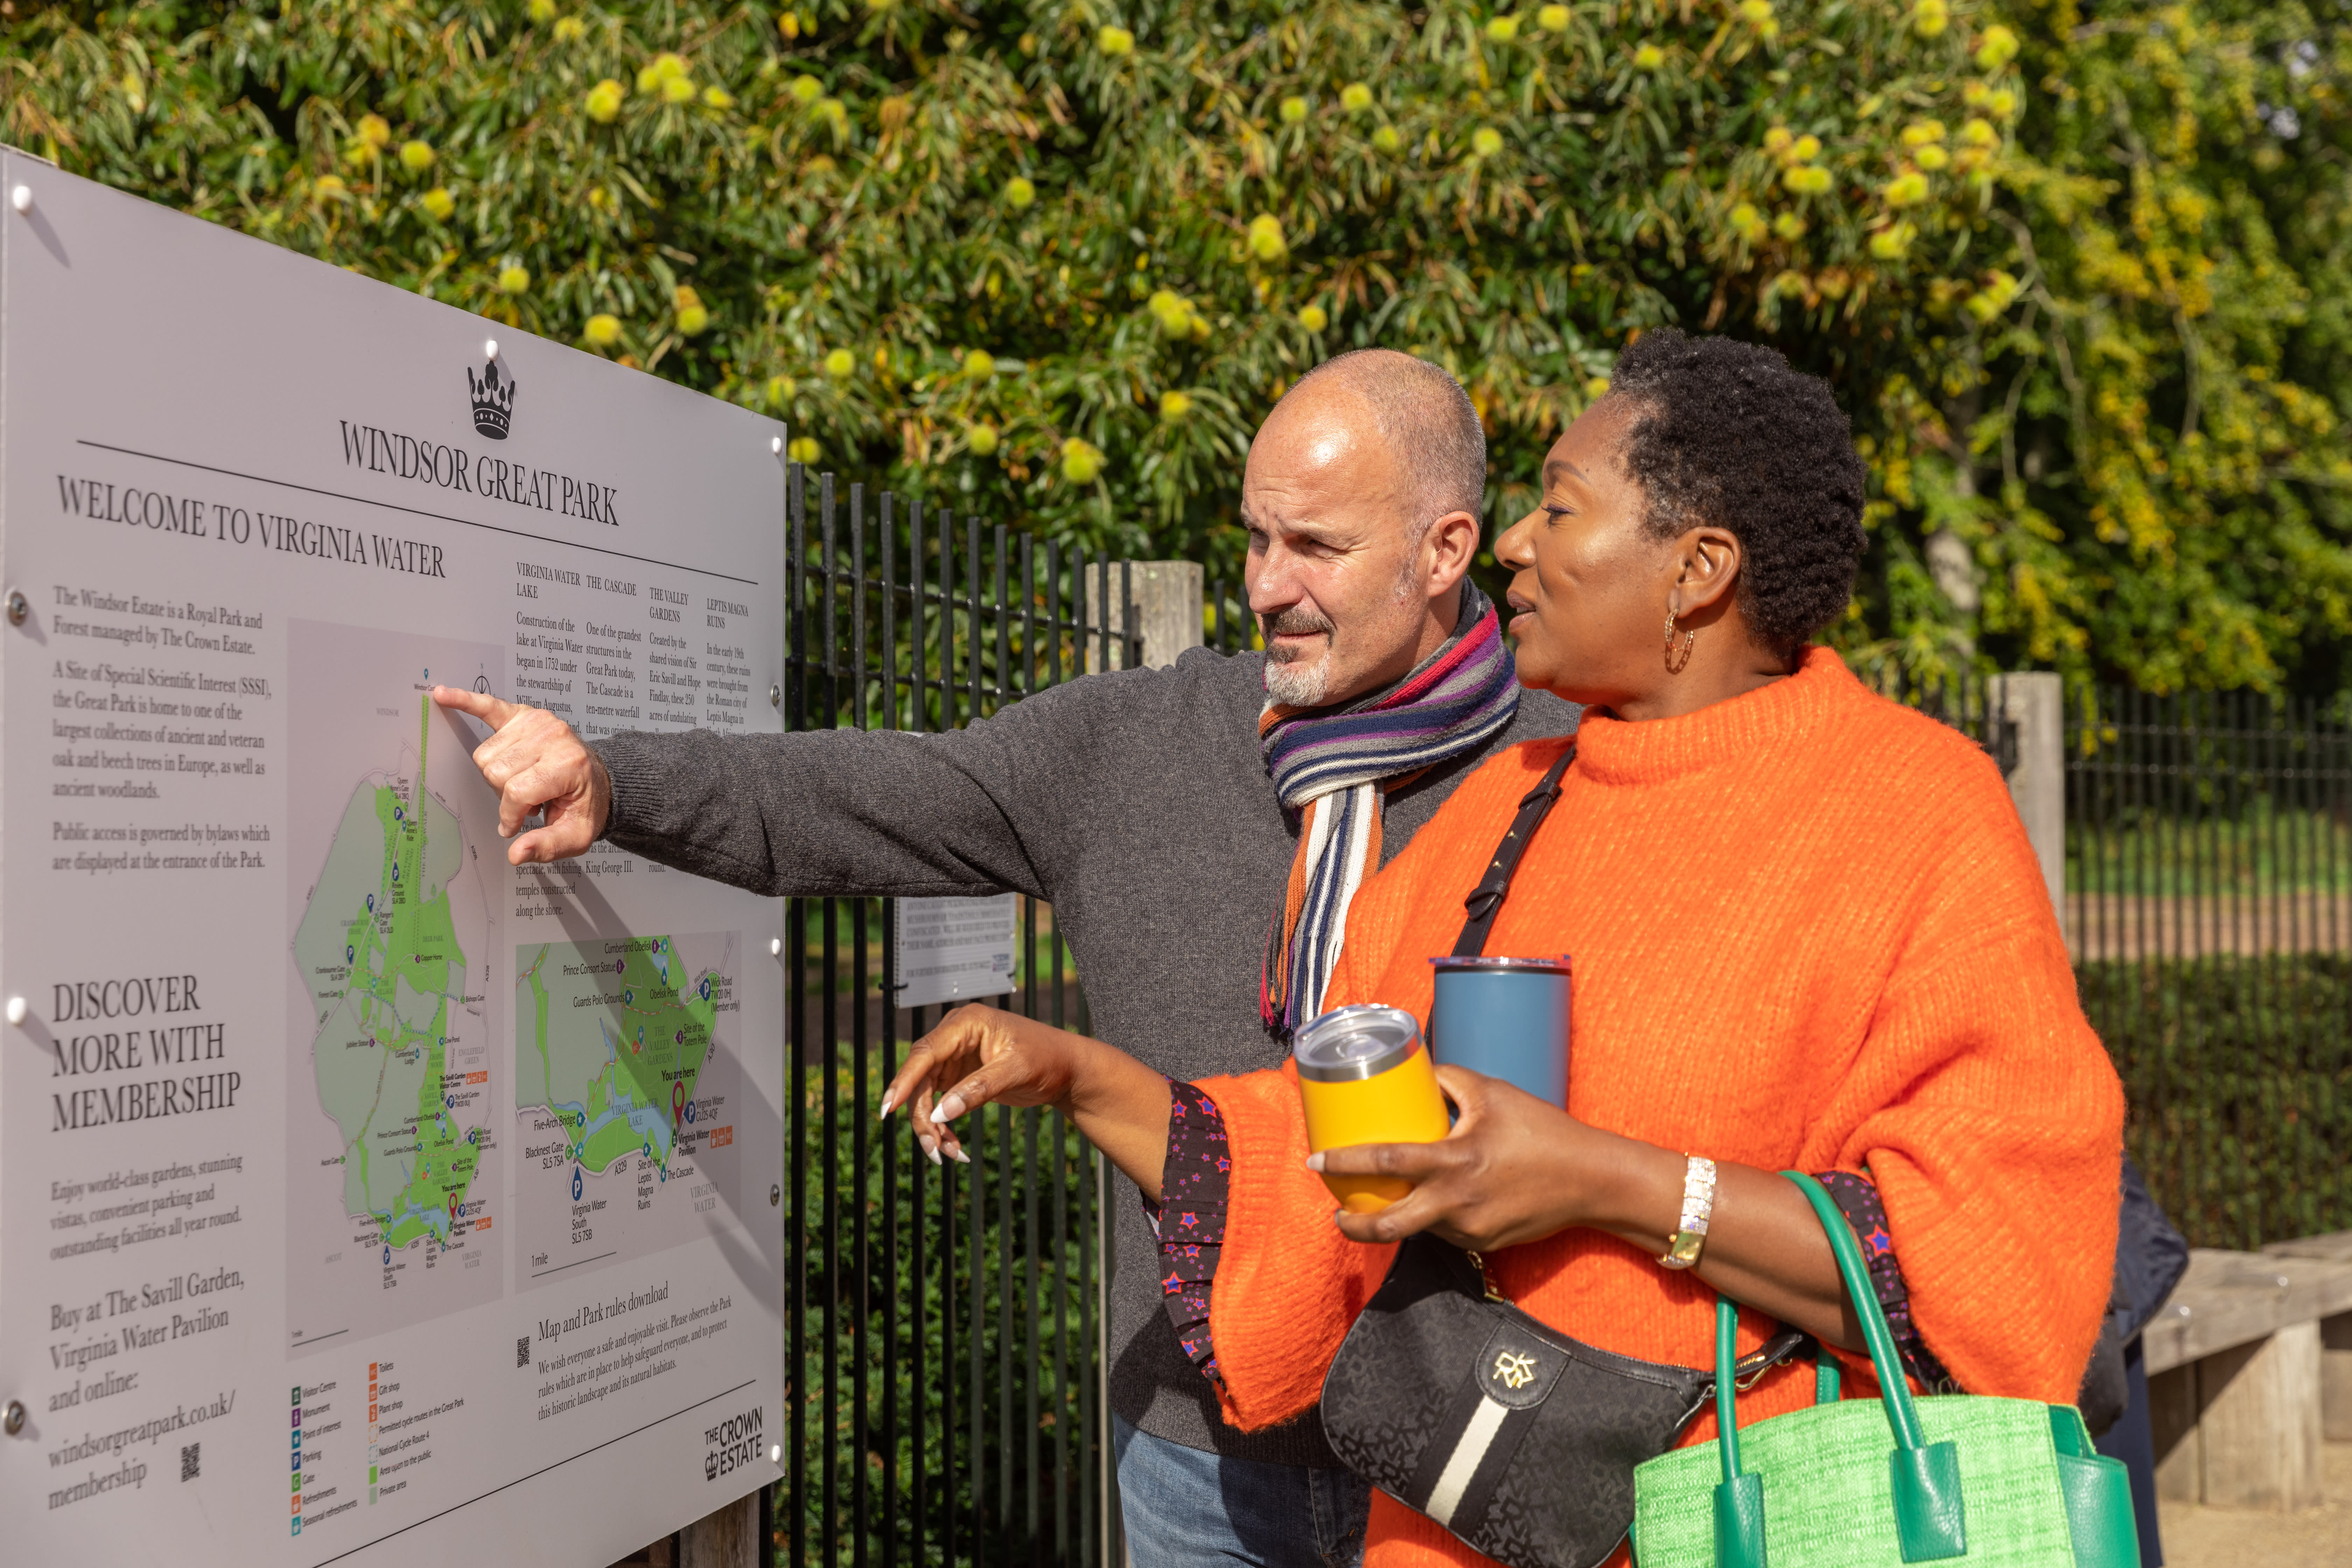 People looking at map of Windsor Great Park